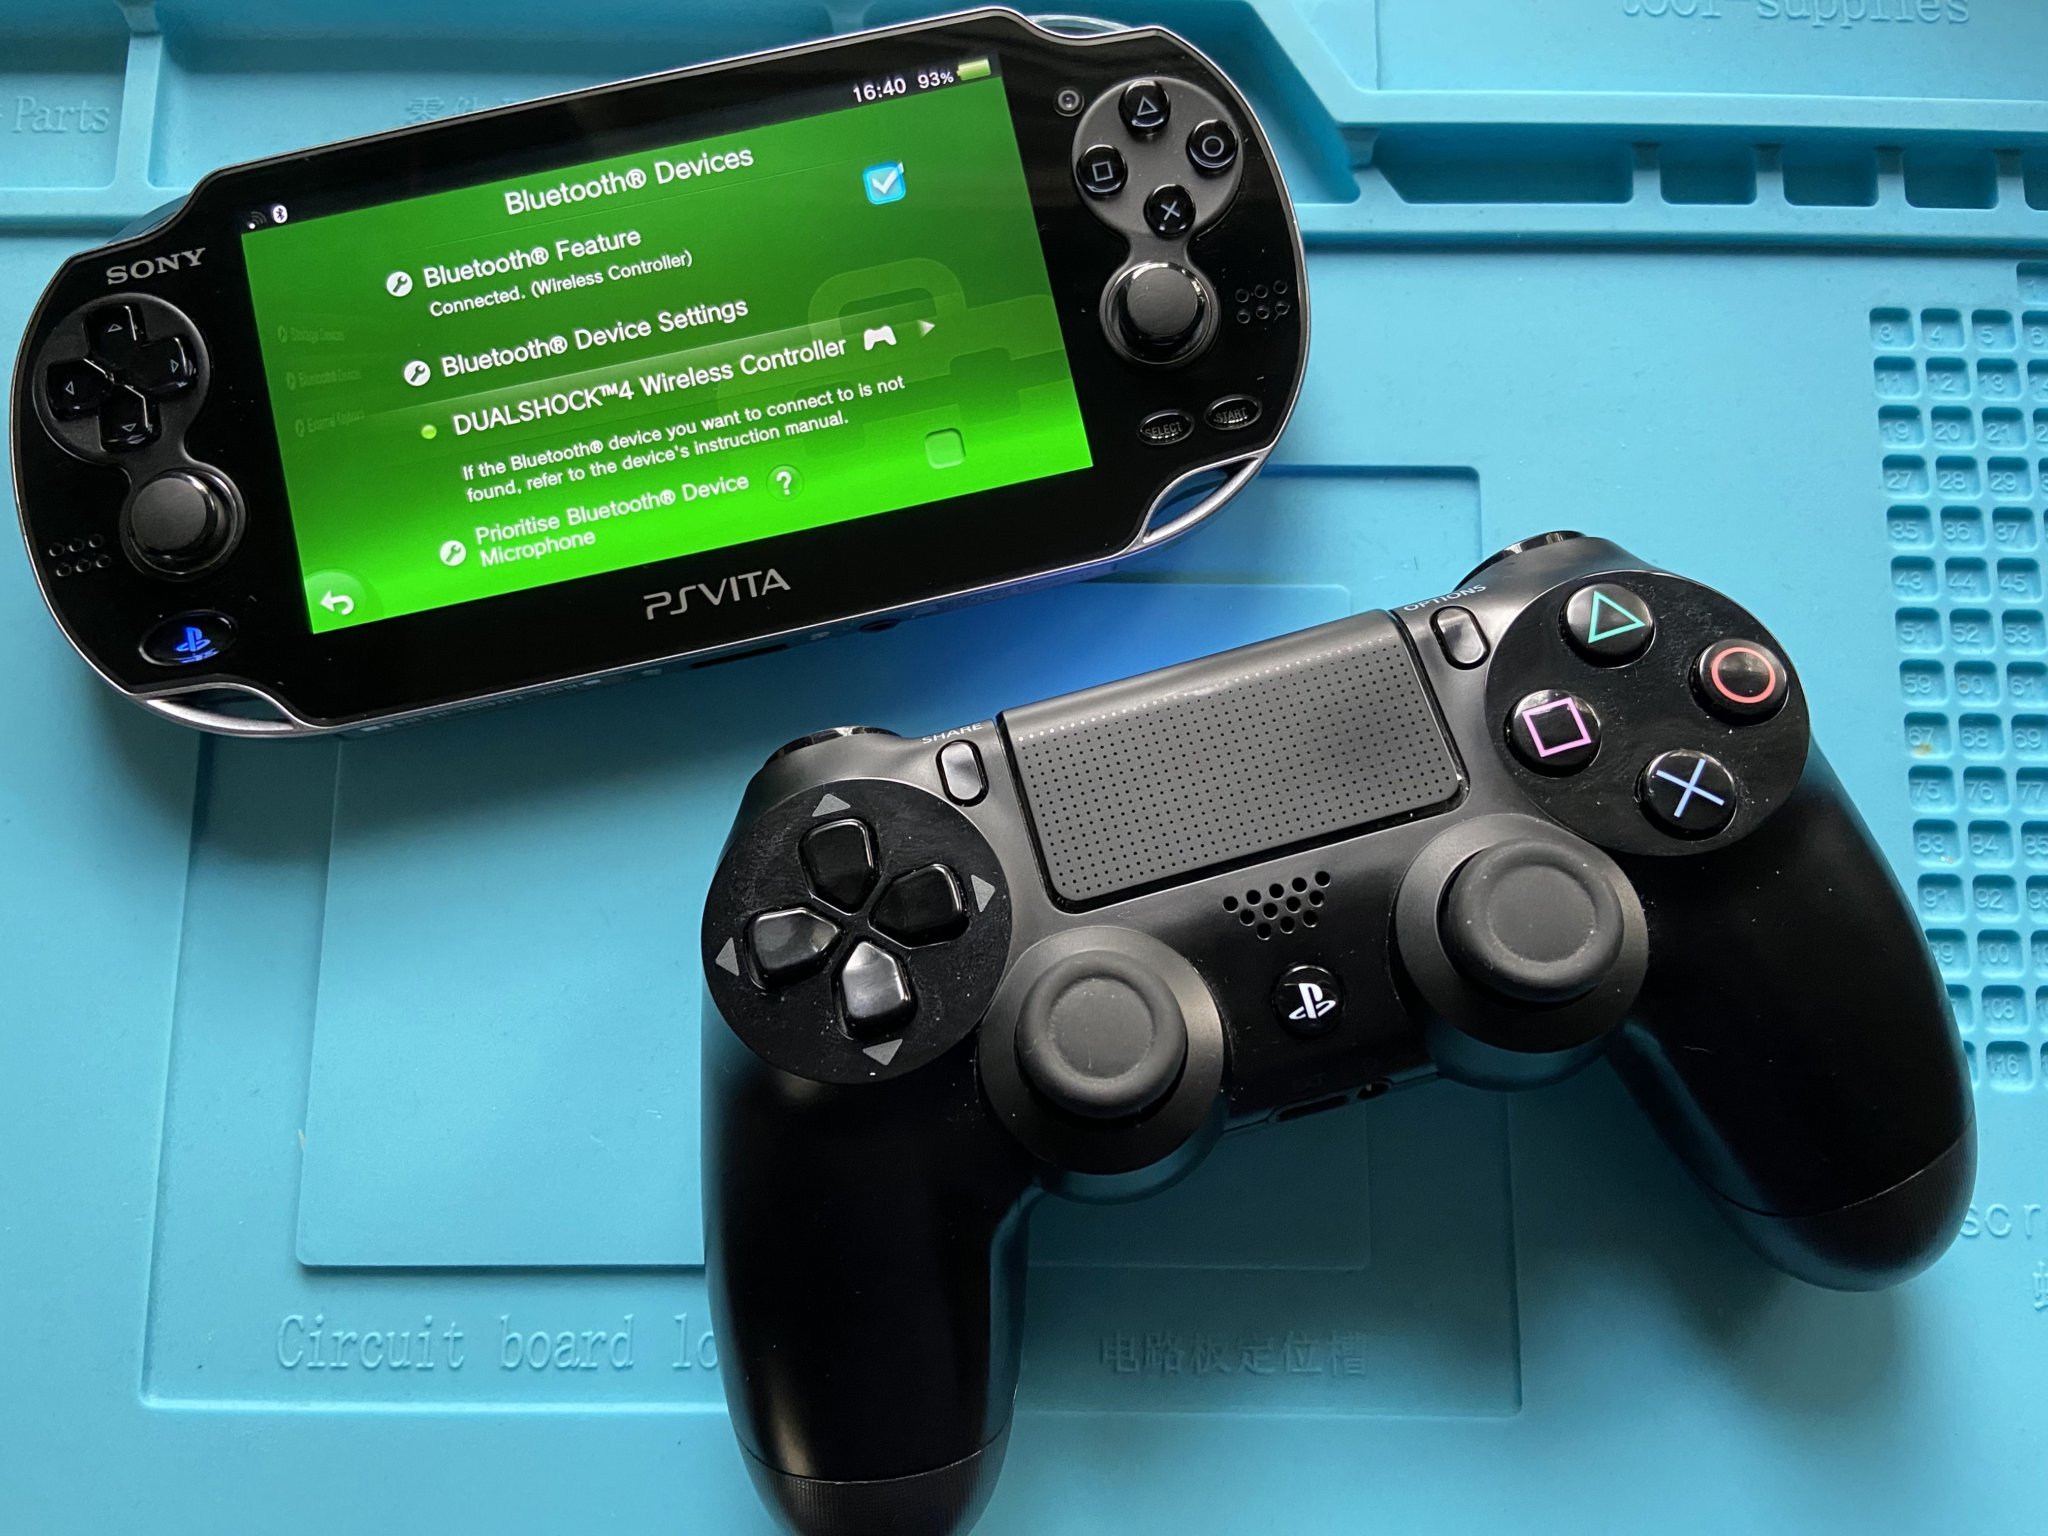 Using a DualShock 4 controller with a PlayStation Vita